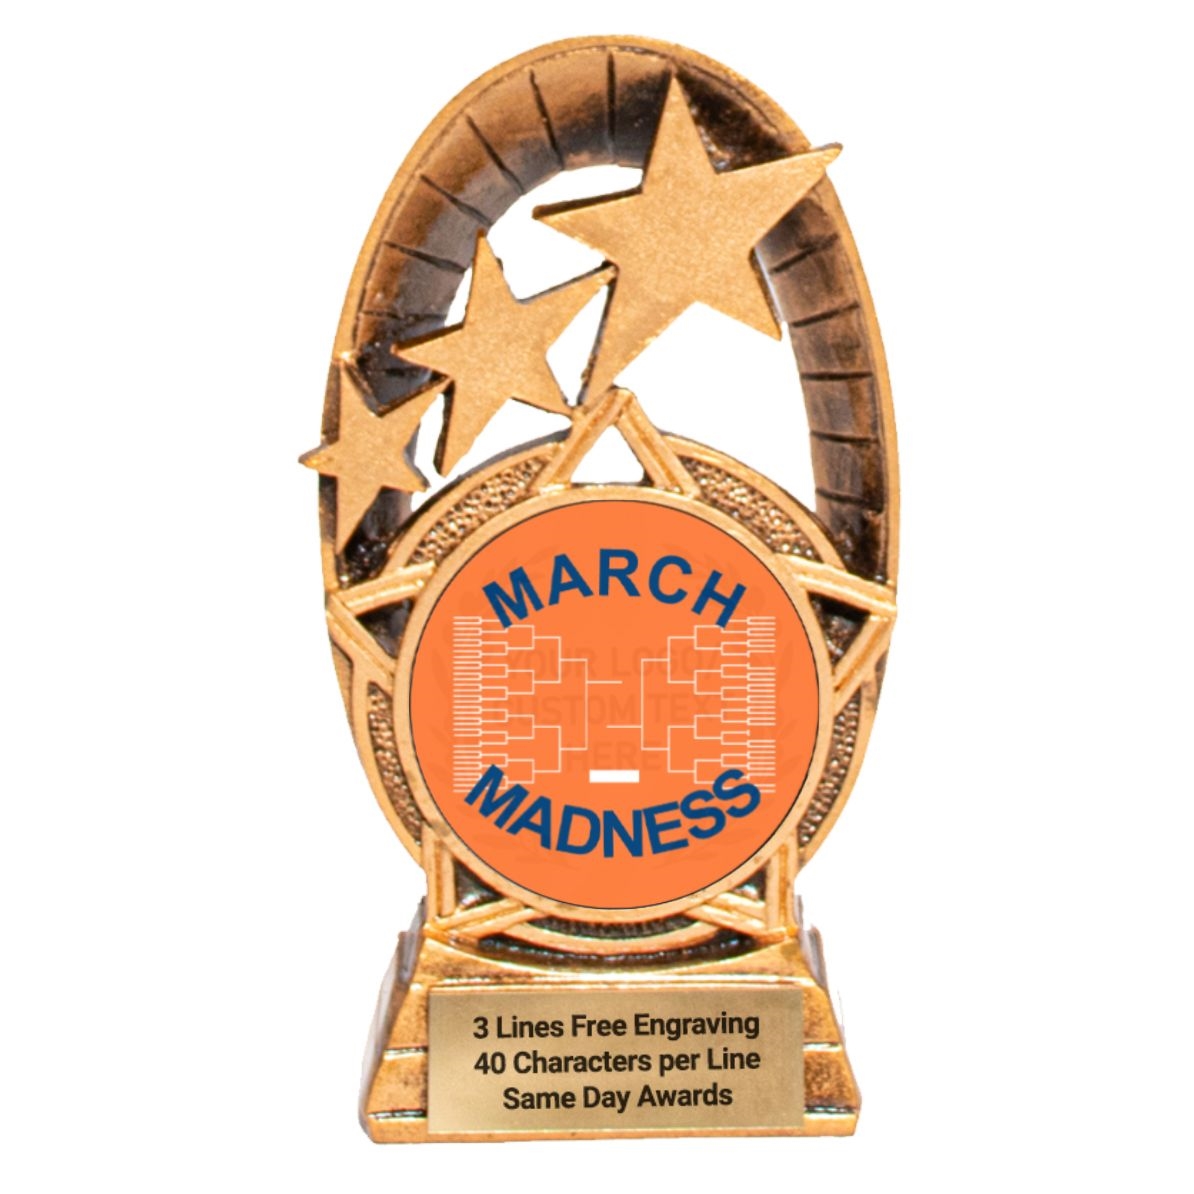 March Madness Basketball Award Gold Metal Cup FREE Engraving FREE 2 Day Mail 